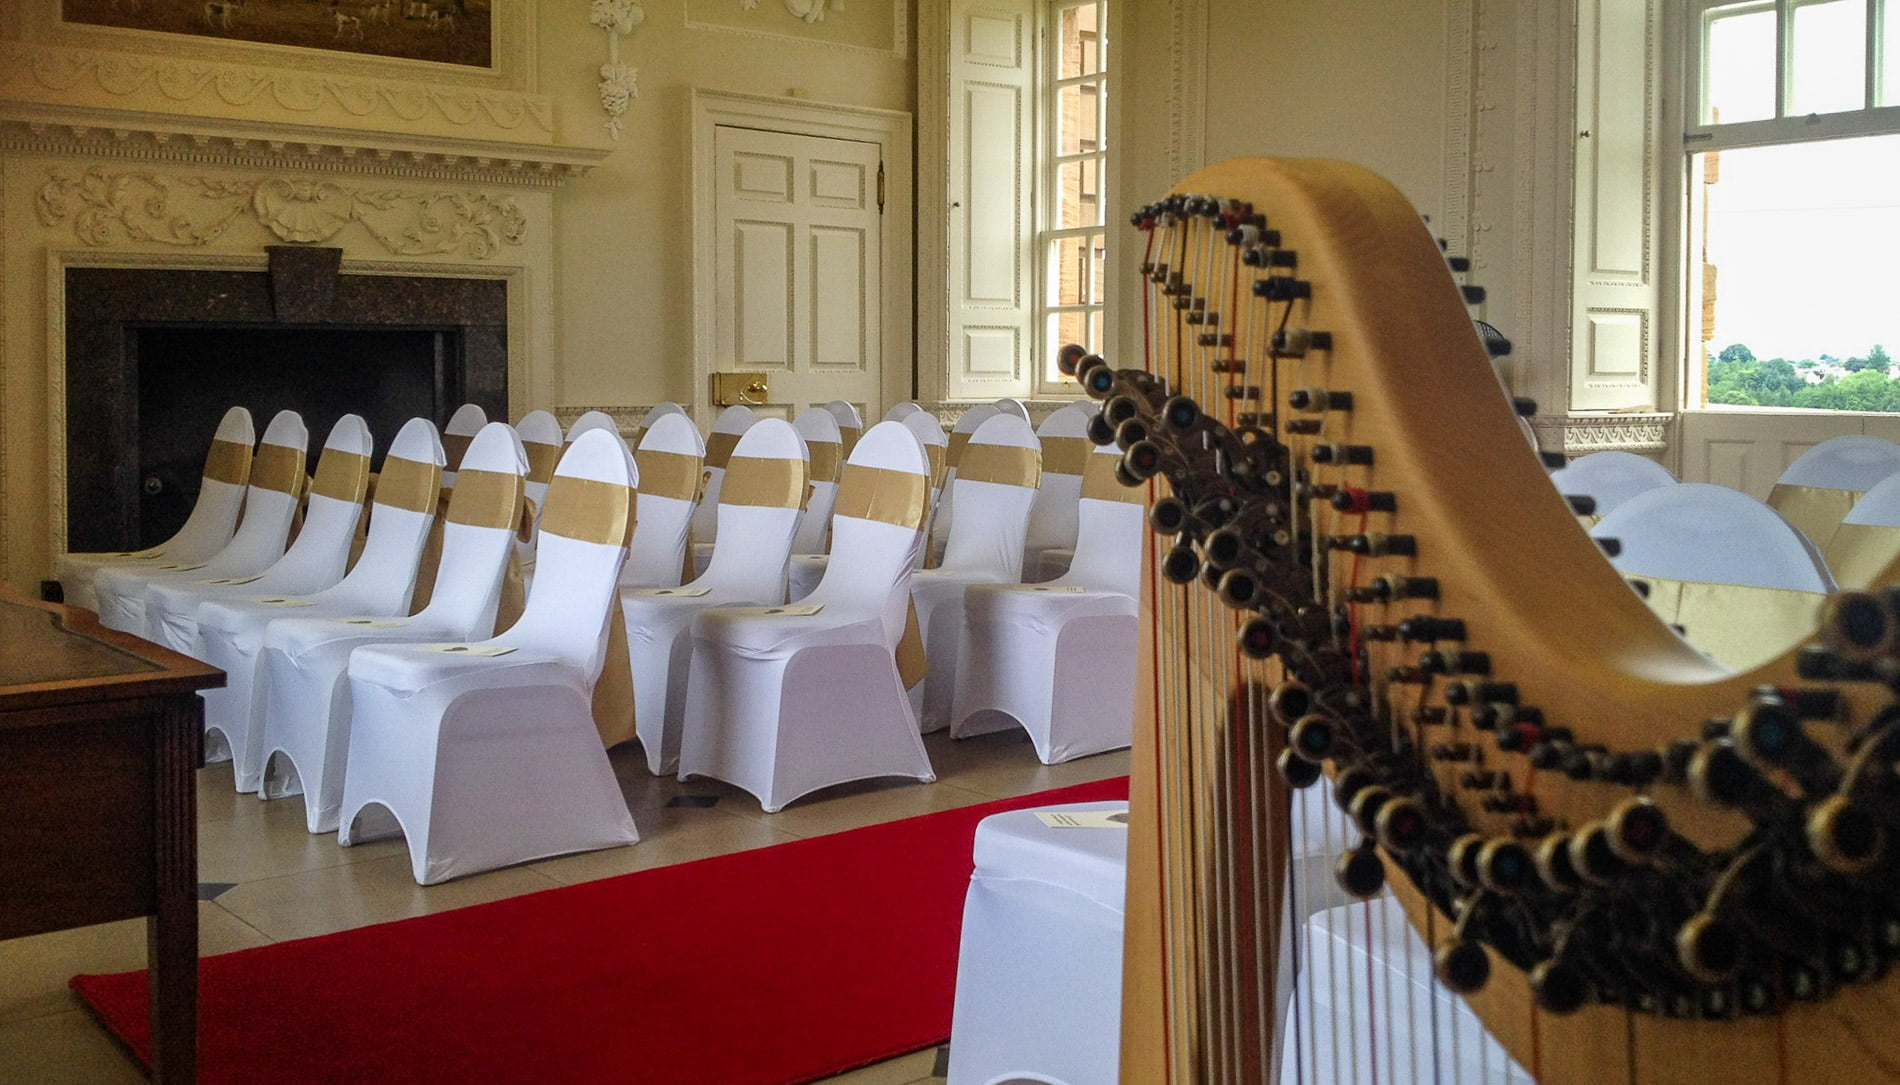 Harp playing at your wedding